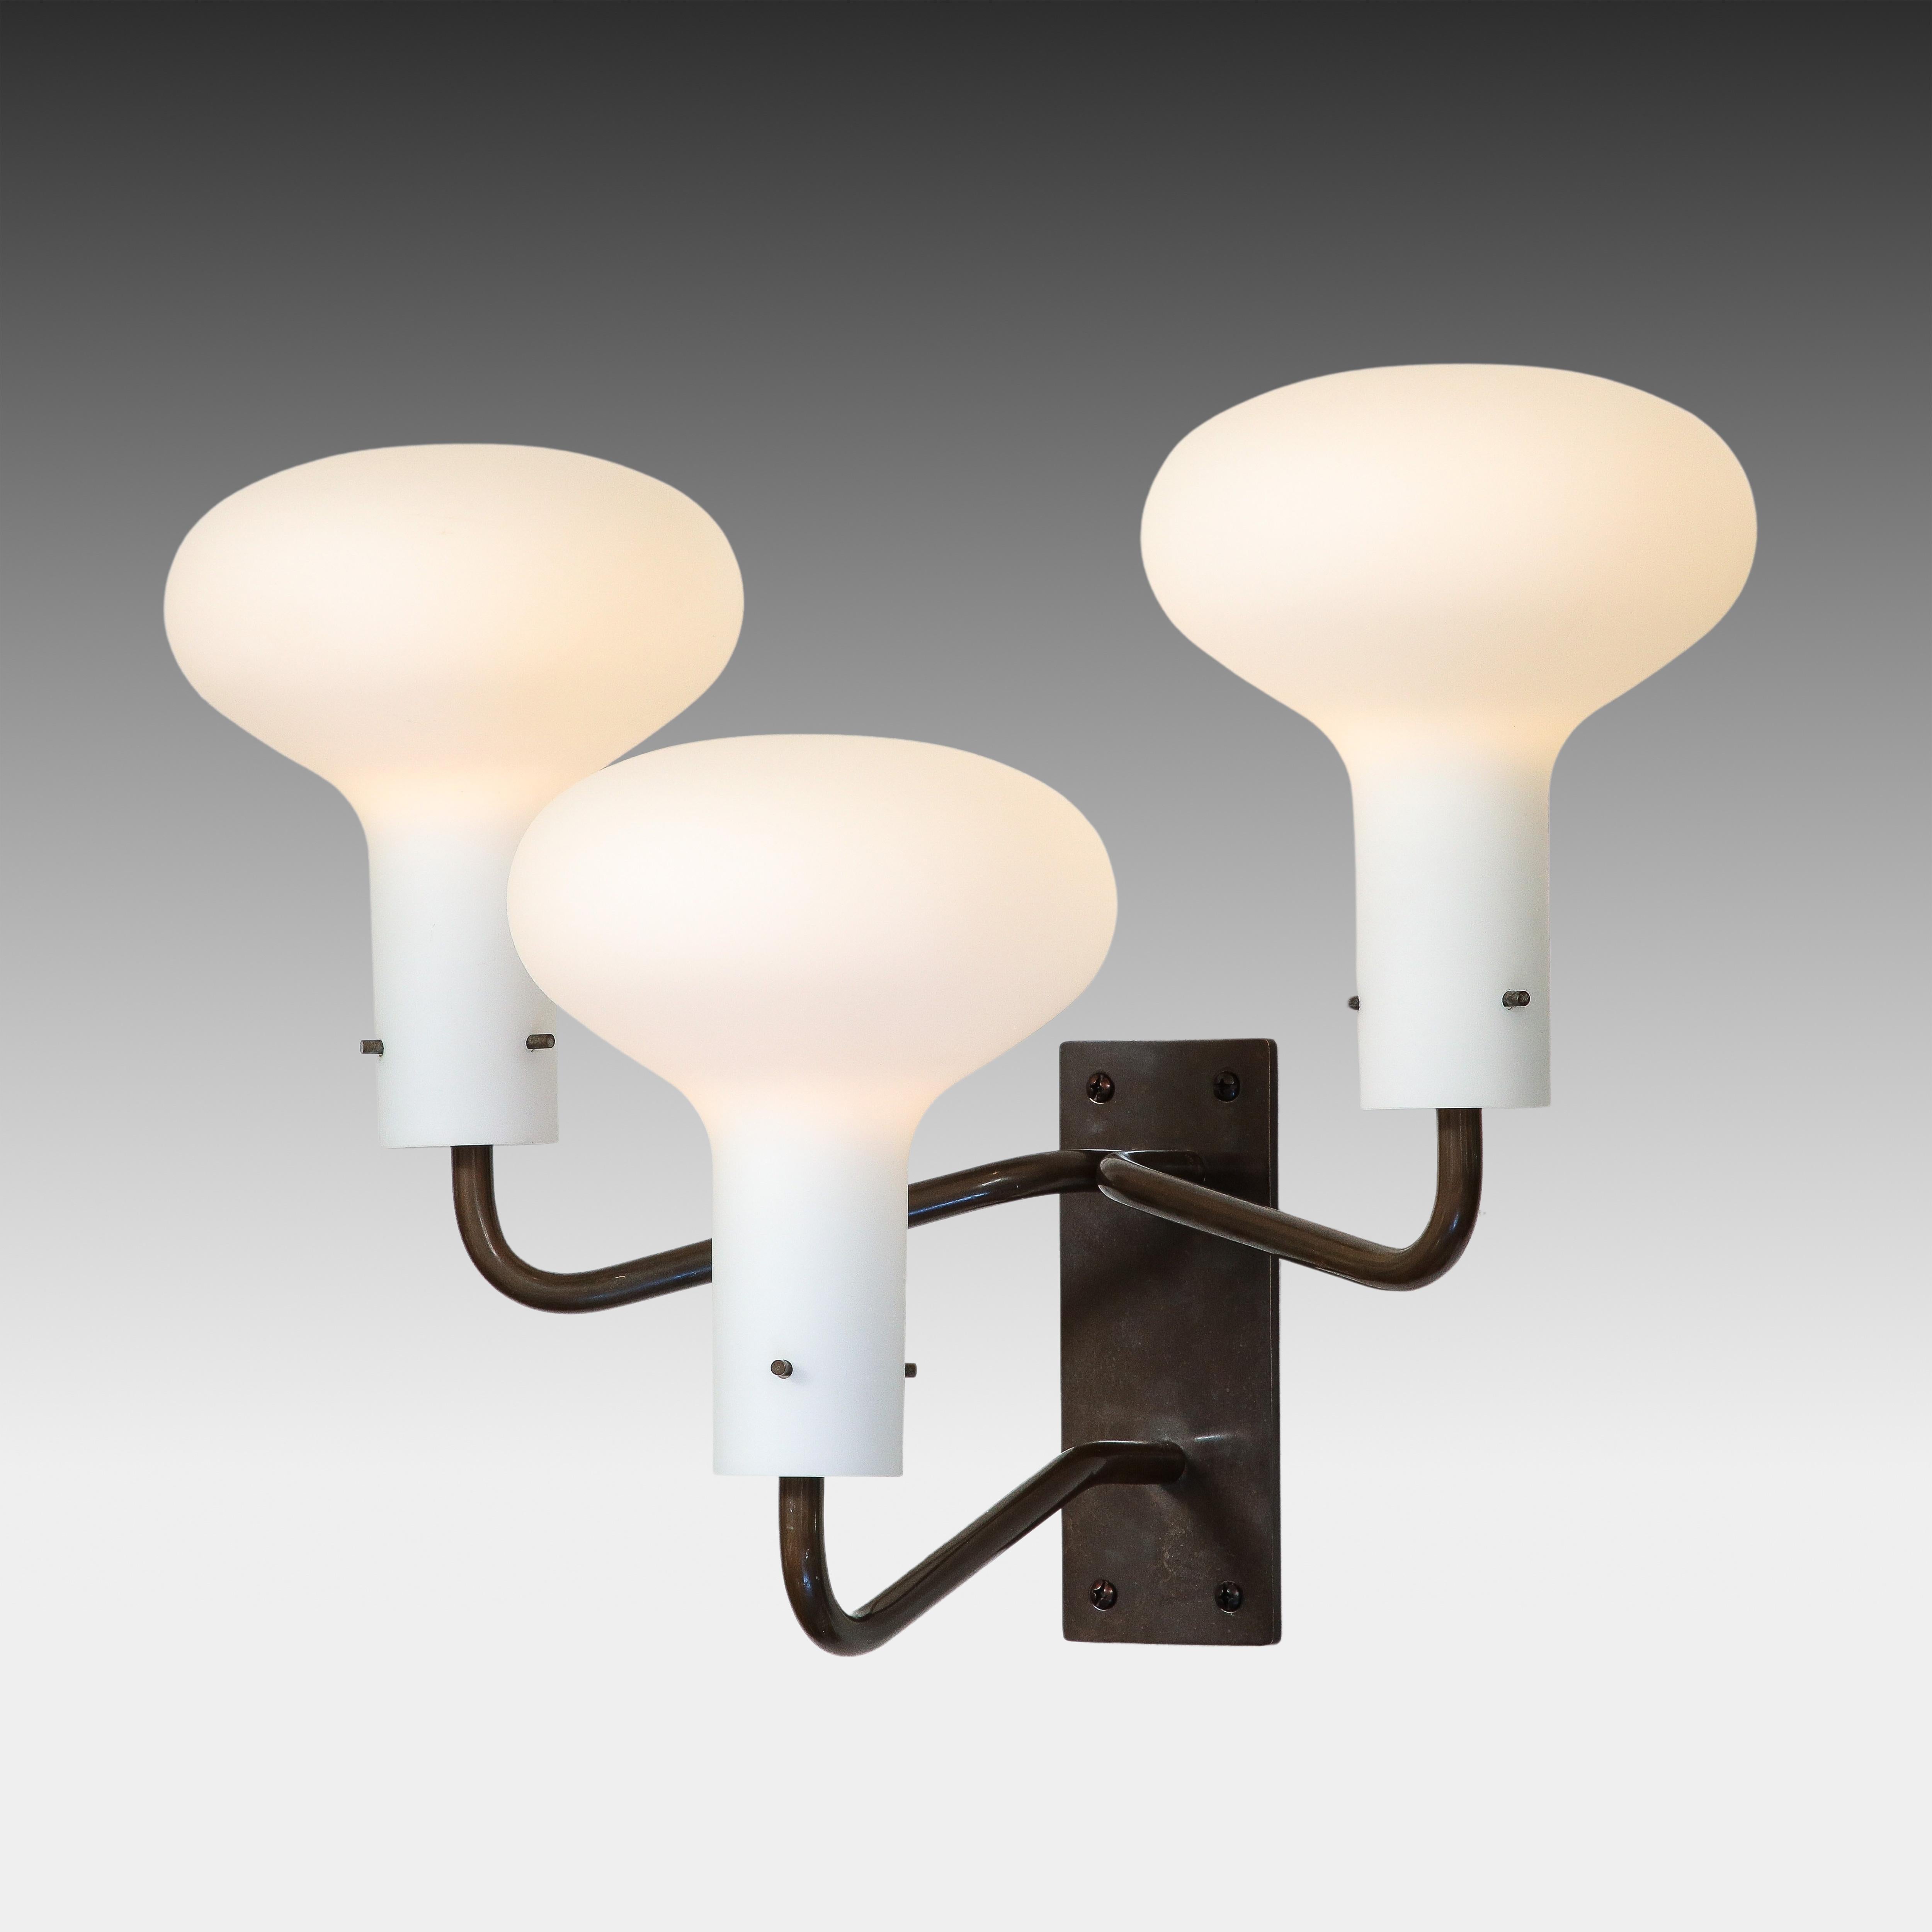 Frosted Ignazio Gardella for Azucena Pair of Wall Lights Model LP12, Italy, 1950s For Sale